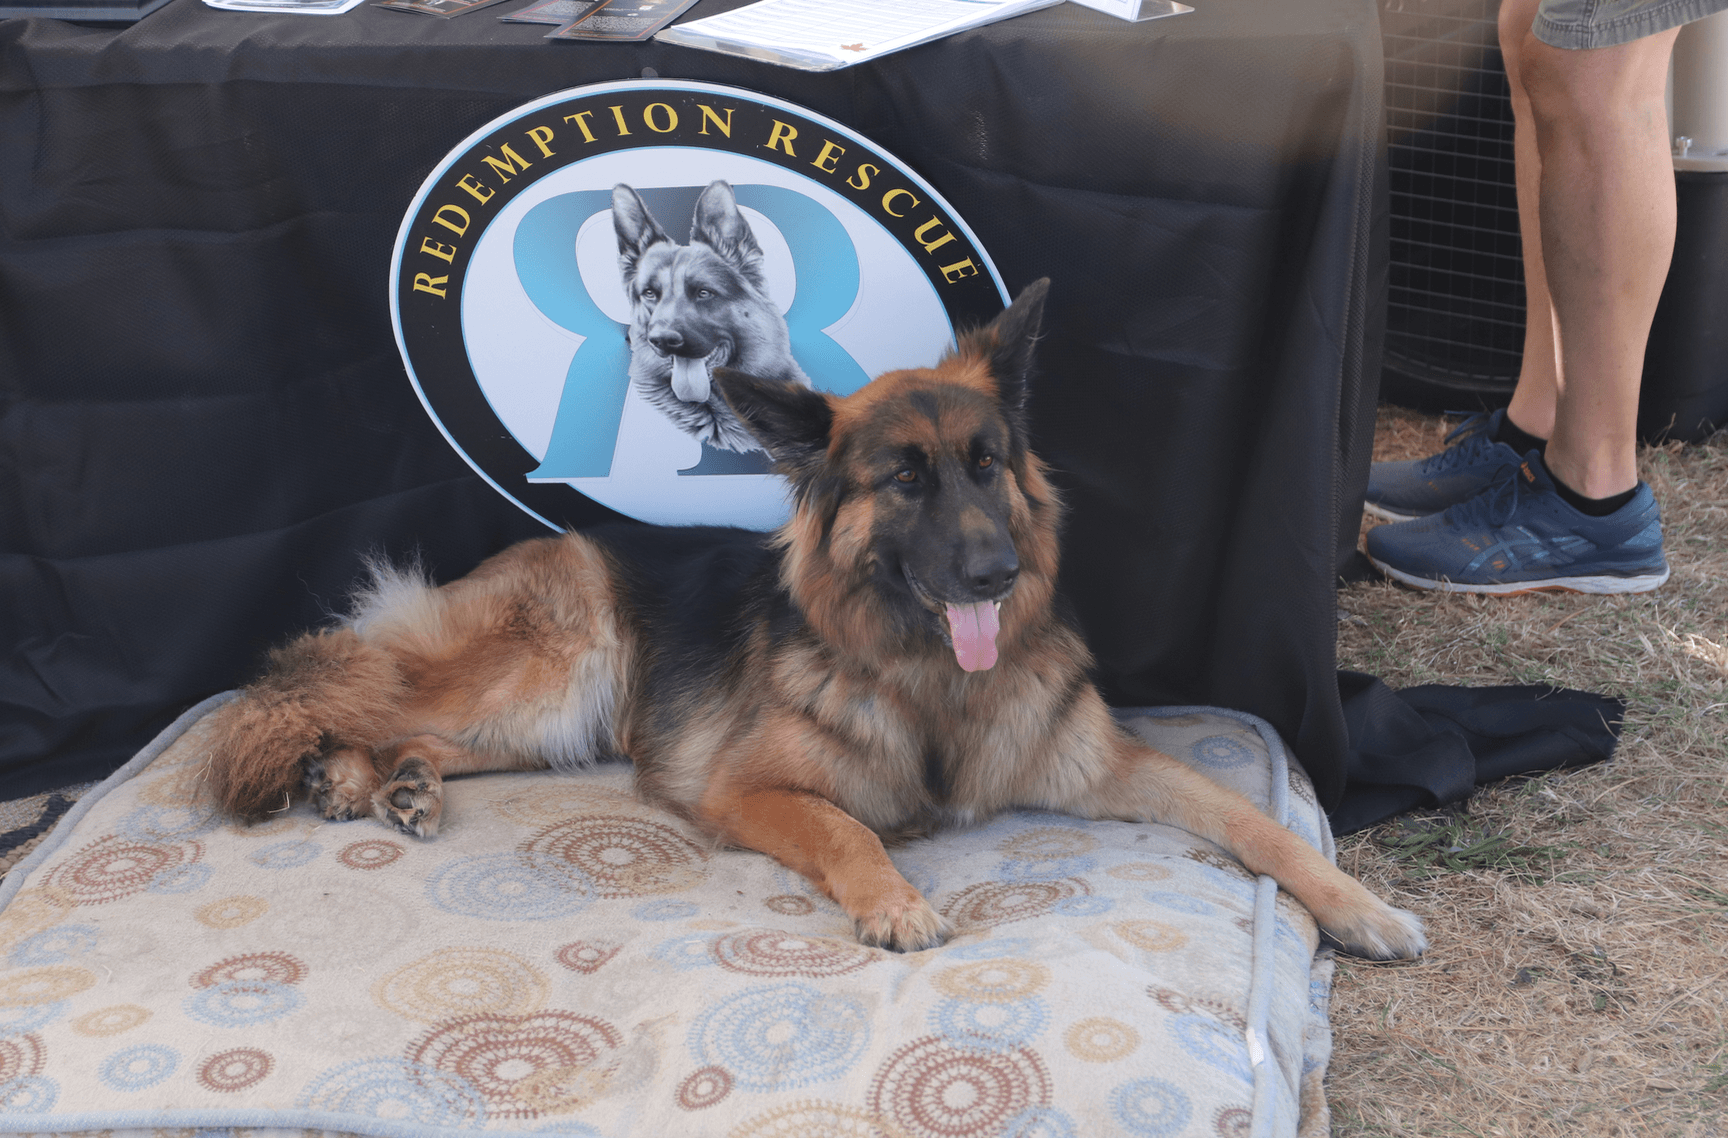 Gina welcomed guests to the ARK Charities tent in the rescue area at Puttin' on the Dog. Sept 29, 2019 Photo: Leslie Yager